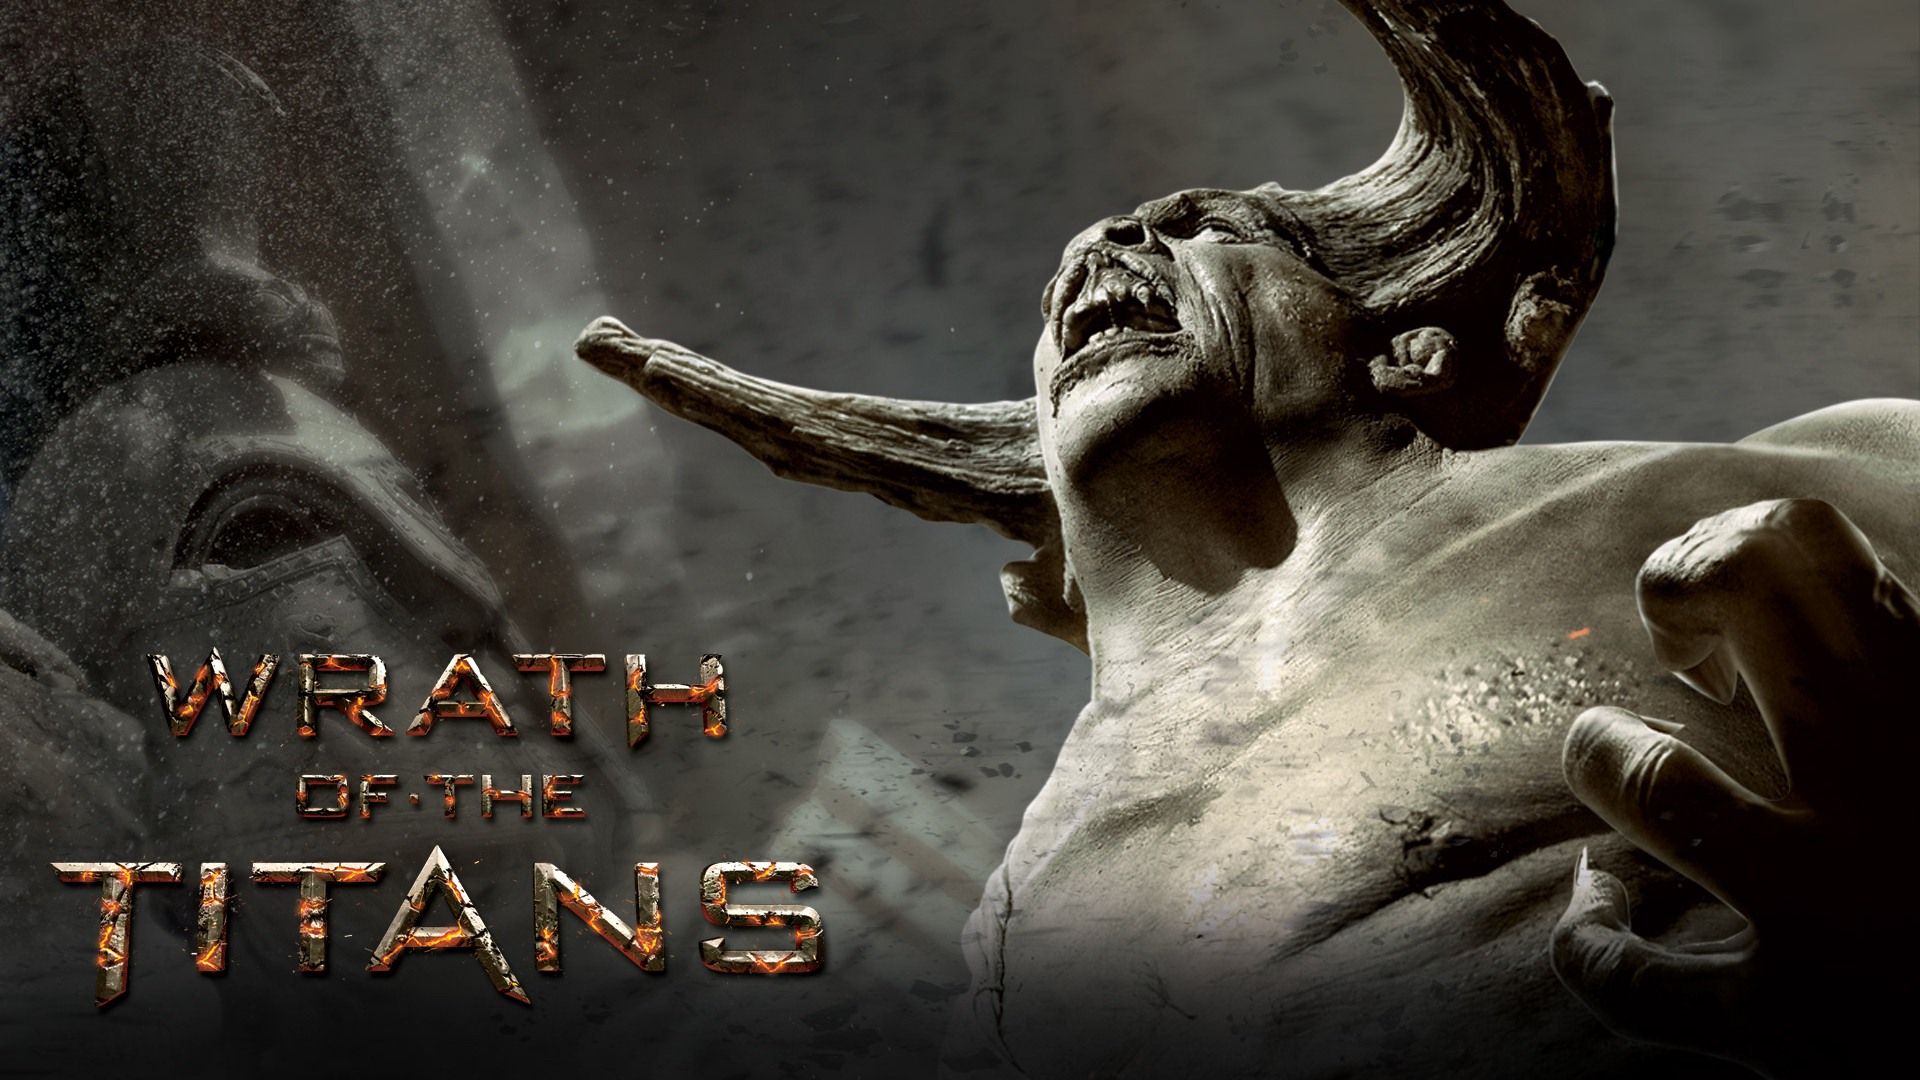 Wrath of the Titans HD Wallpapers #7 - 1920x1080